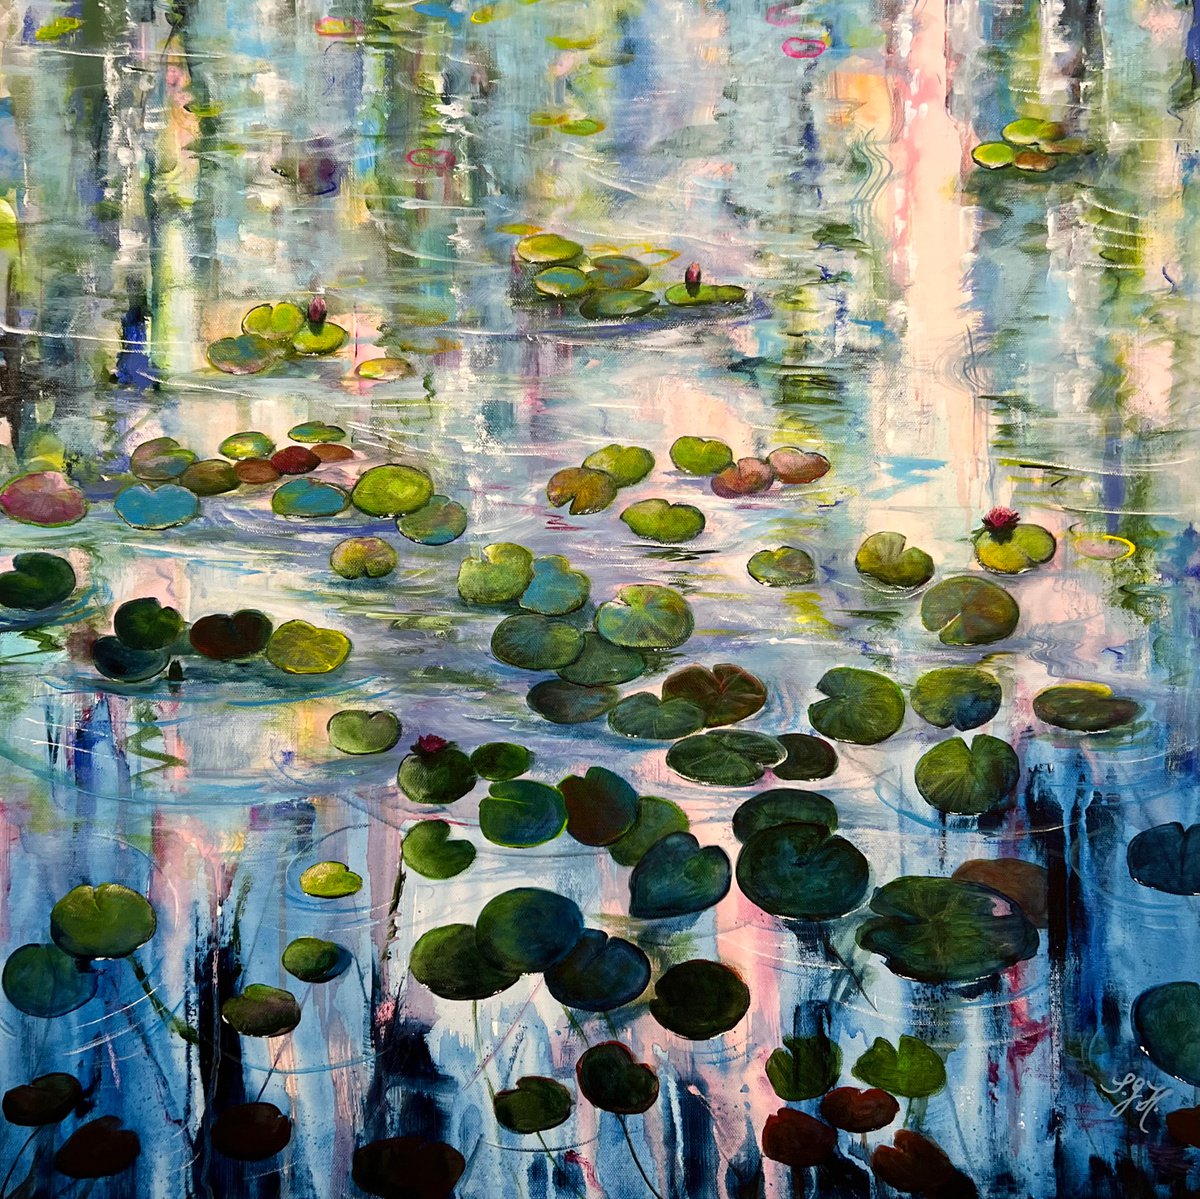 Water Lilies At Sunset 1 by Sandra Gebhardt-Hoepfner